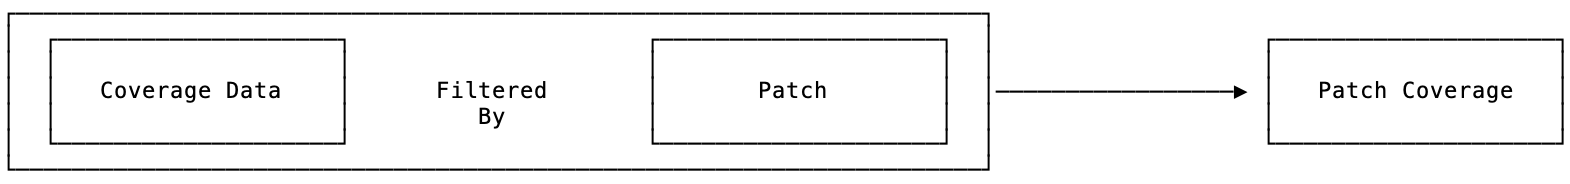 Patch Coverage Formula: Coverage Data + Patch = Patch Coverage